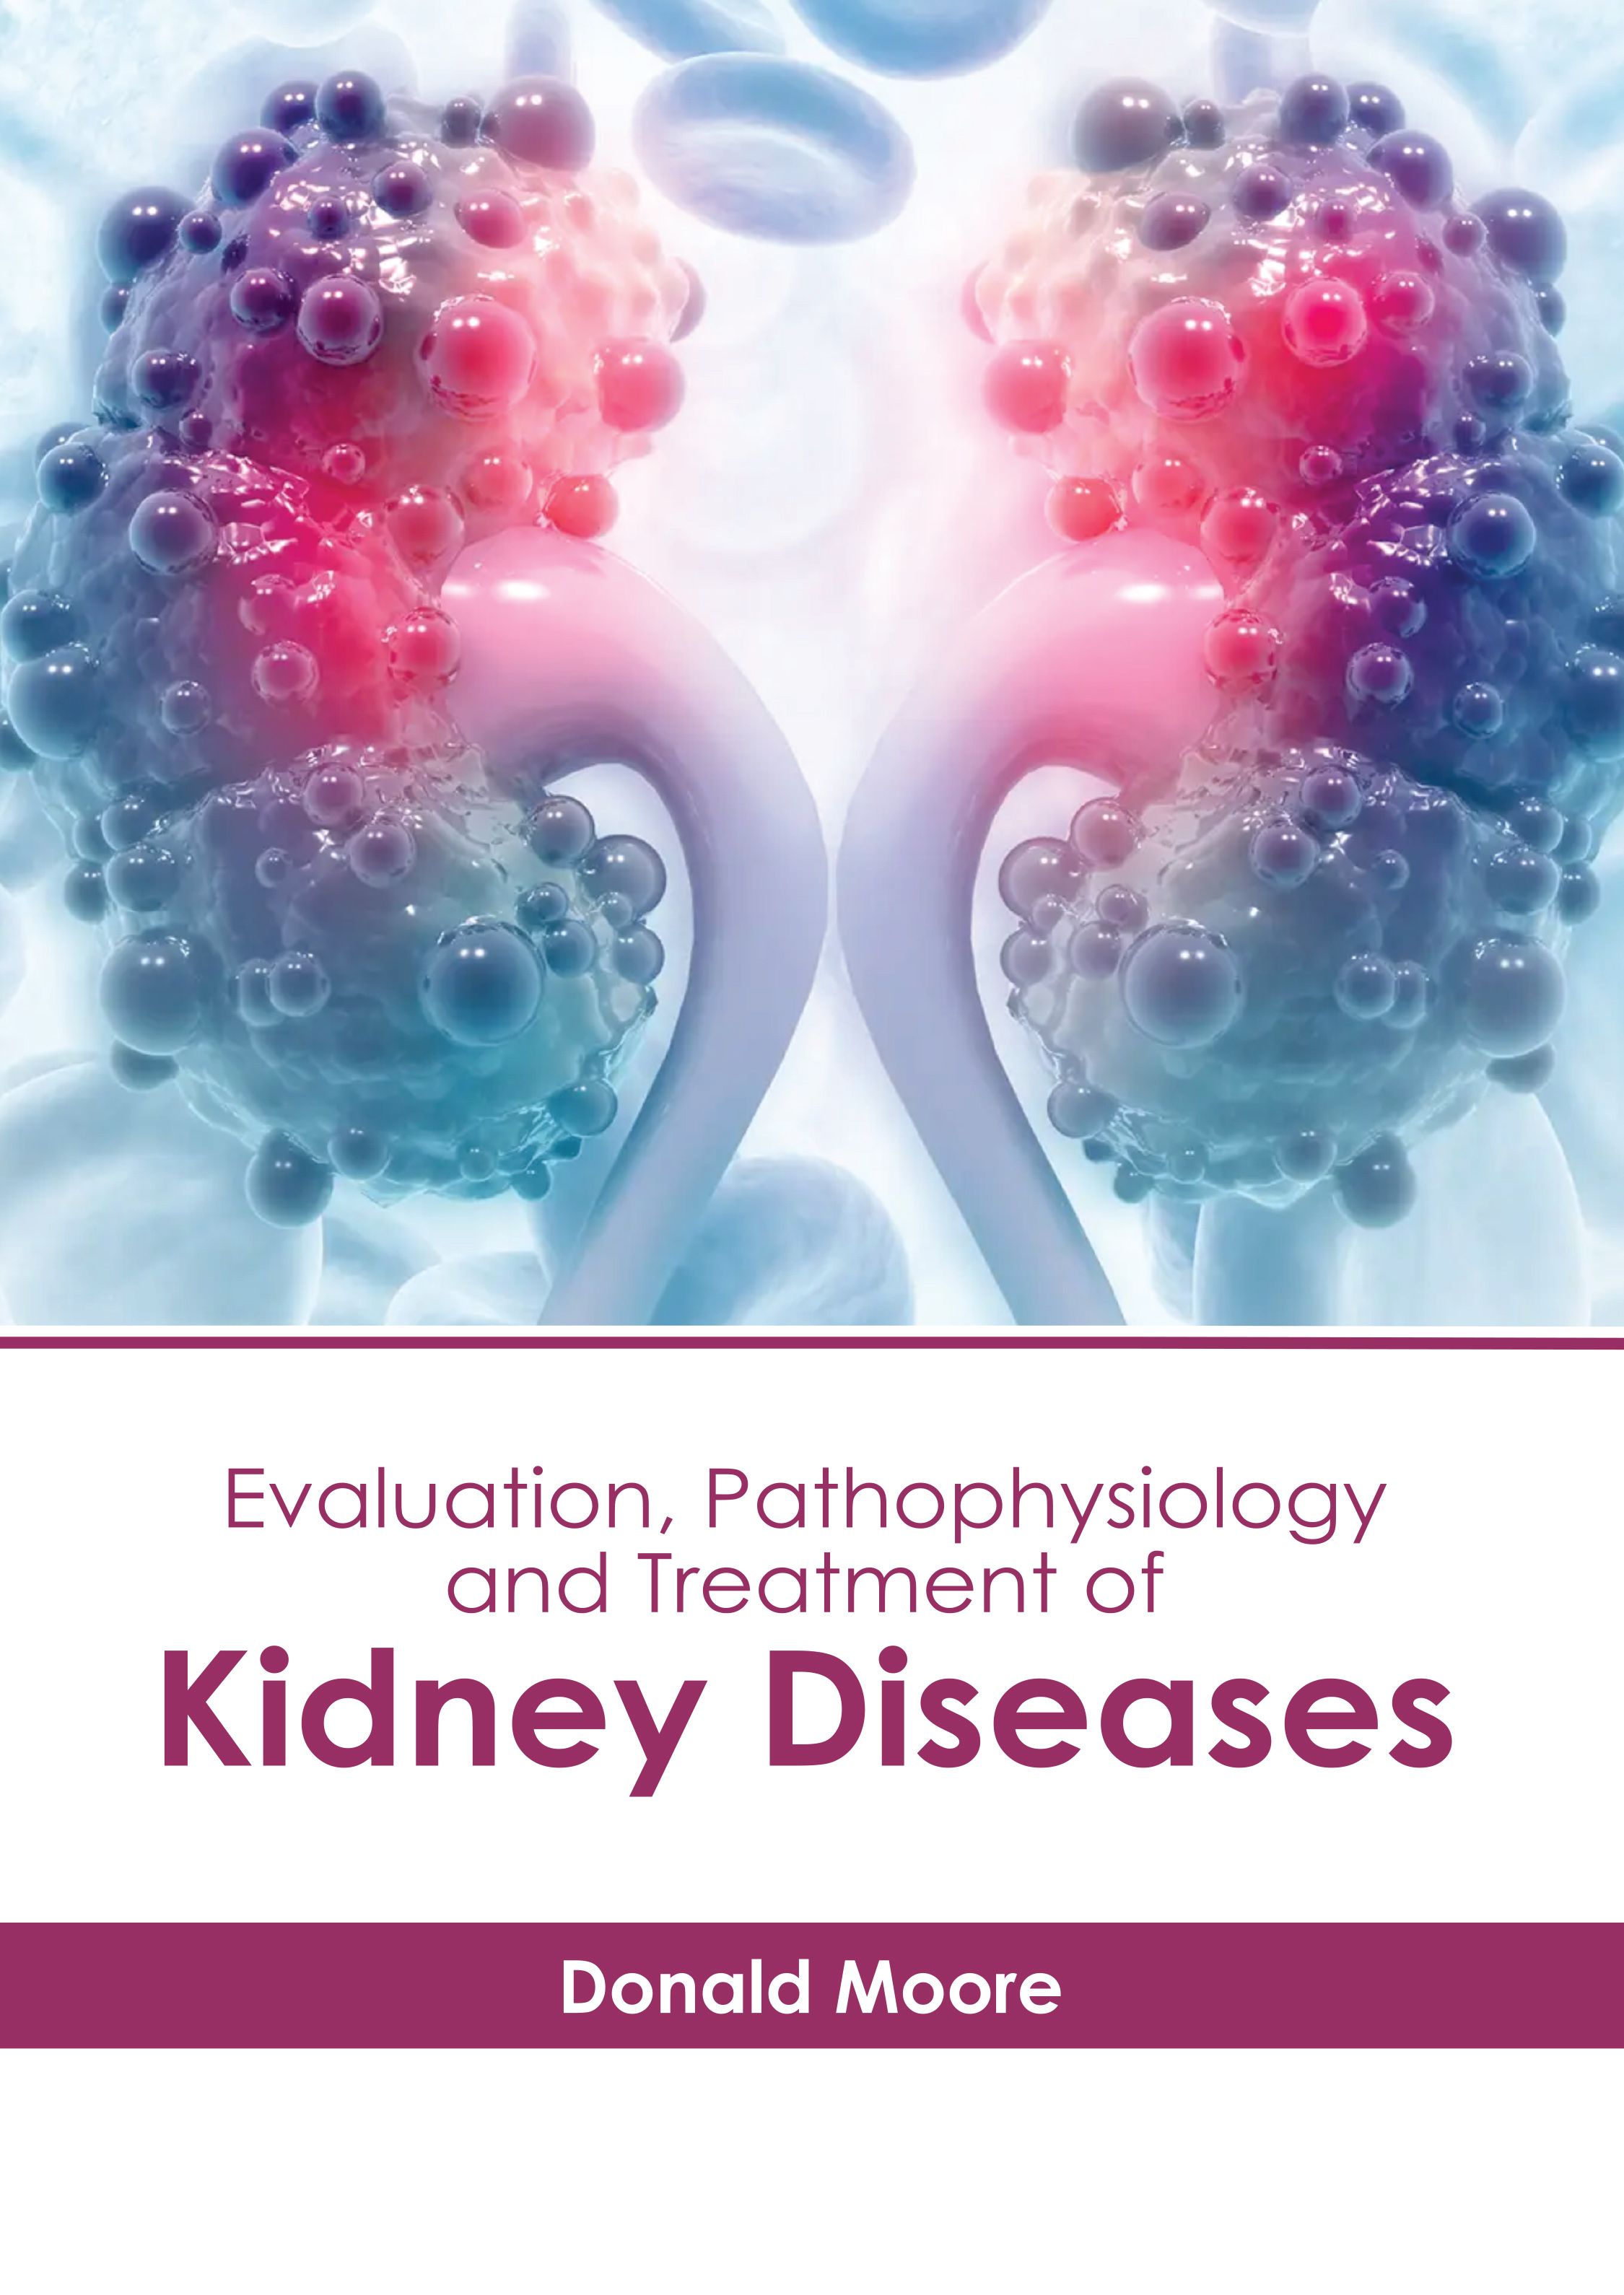 EVALUATION, PATHOPHYSIOLOGY AND TREATMENT OF KIDNEY DISEASES